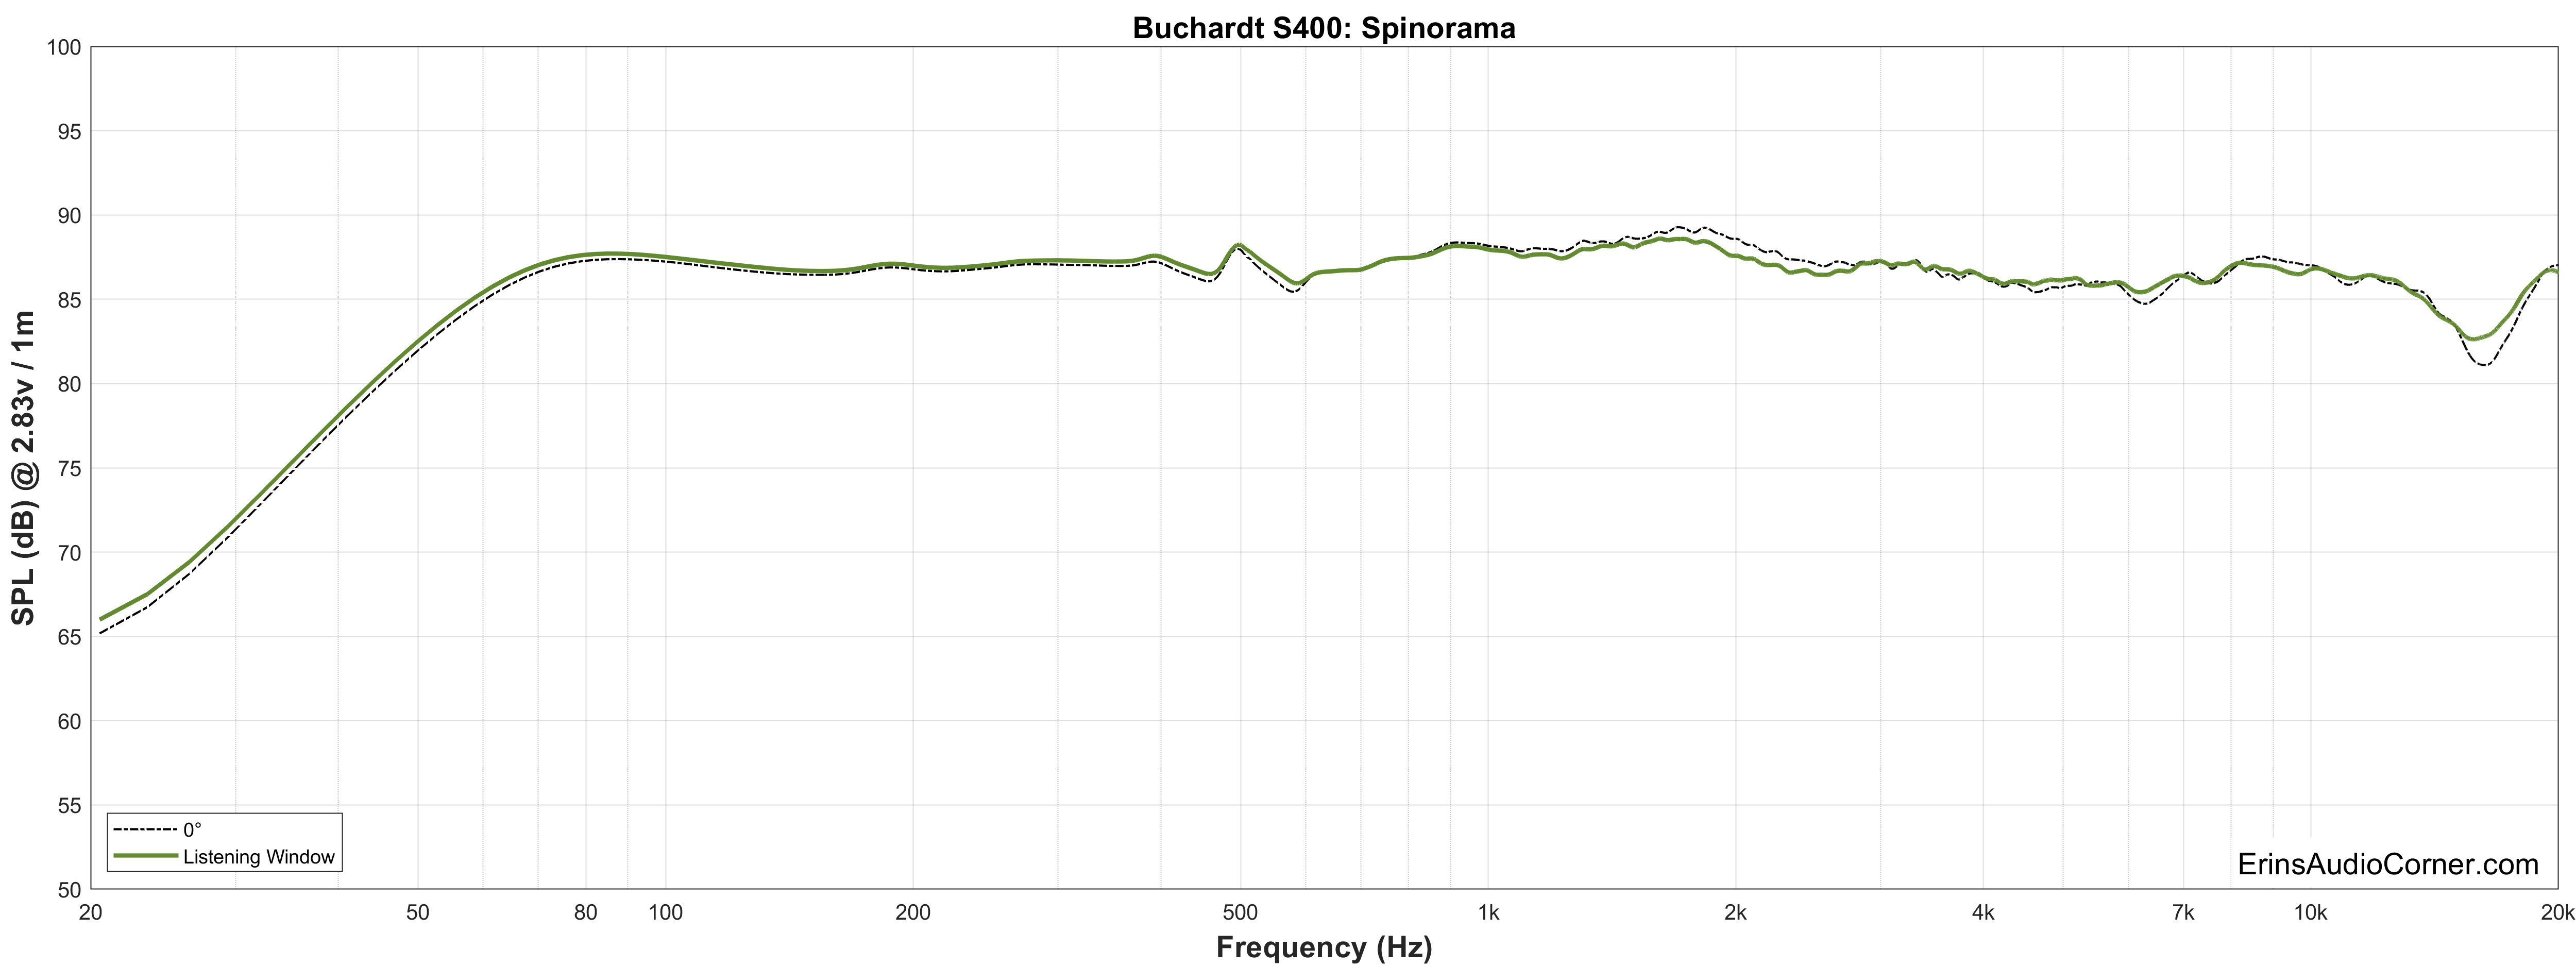 Buchardt S400 Spinorama.png